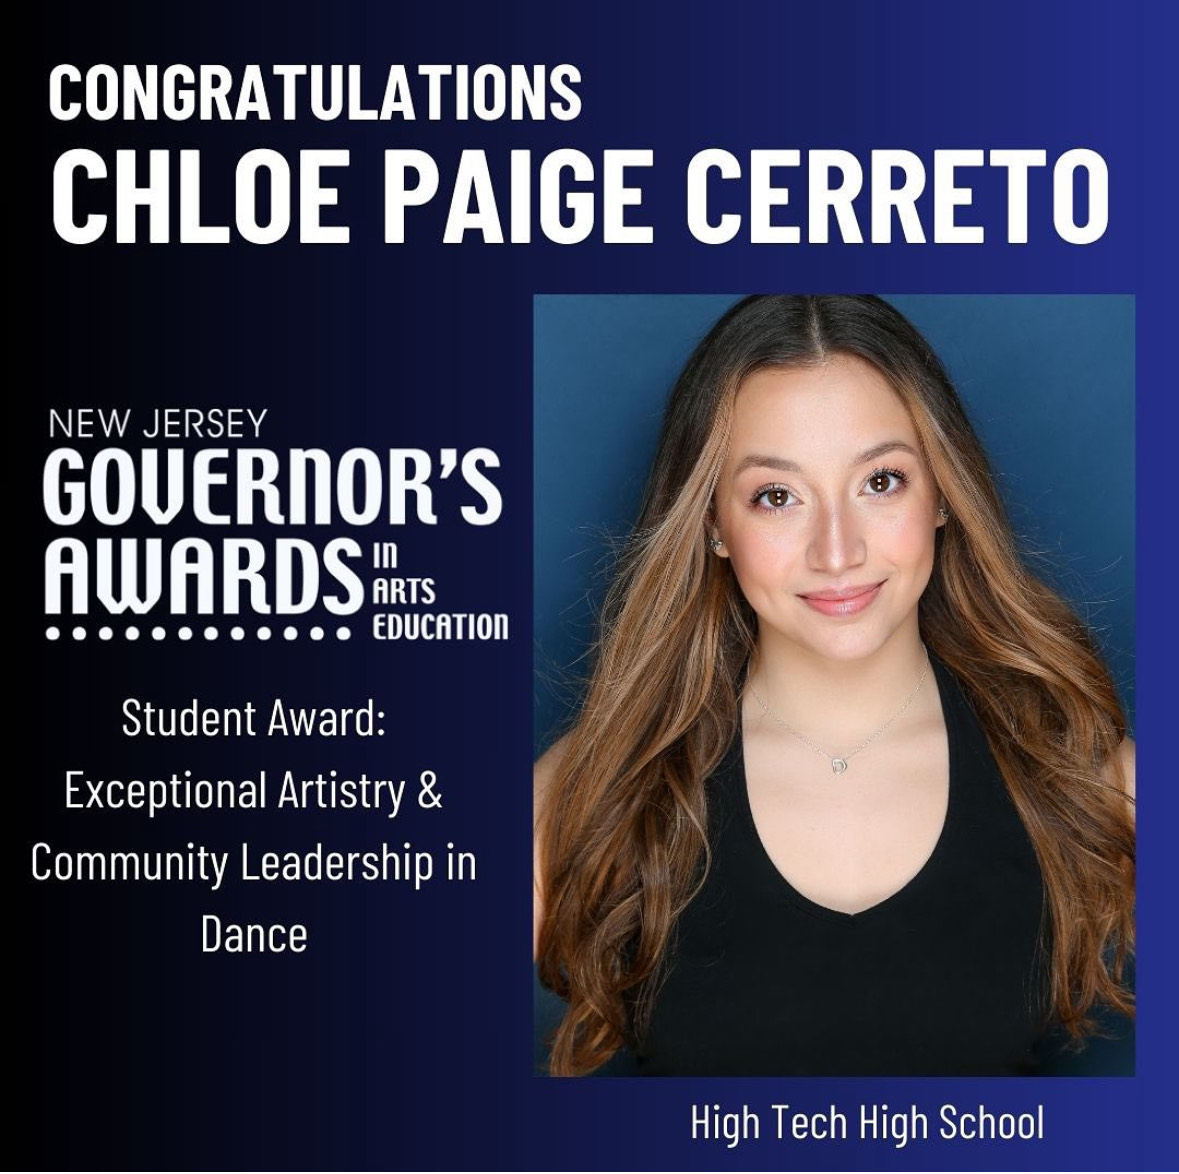 Chloe Paige Cerreto Receives Governor's Award <br />for Exceptional Artistry & Community Leadership in Dance